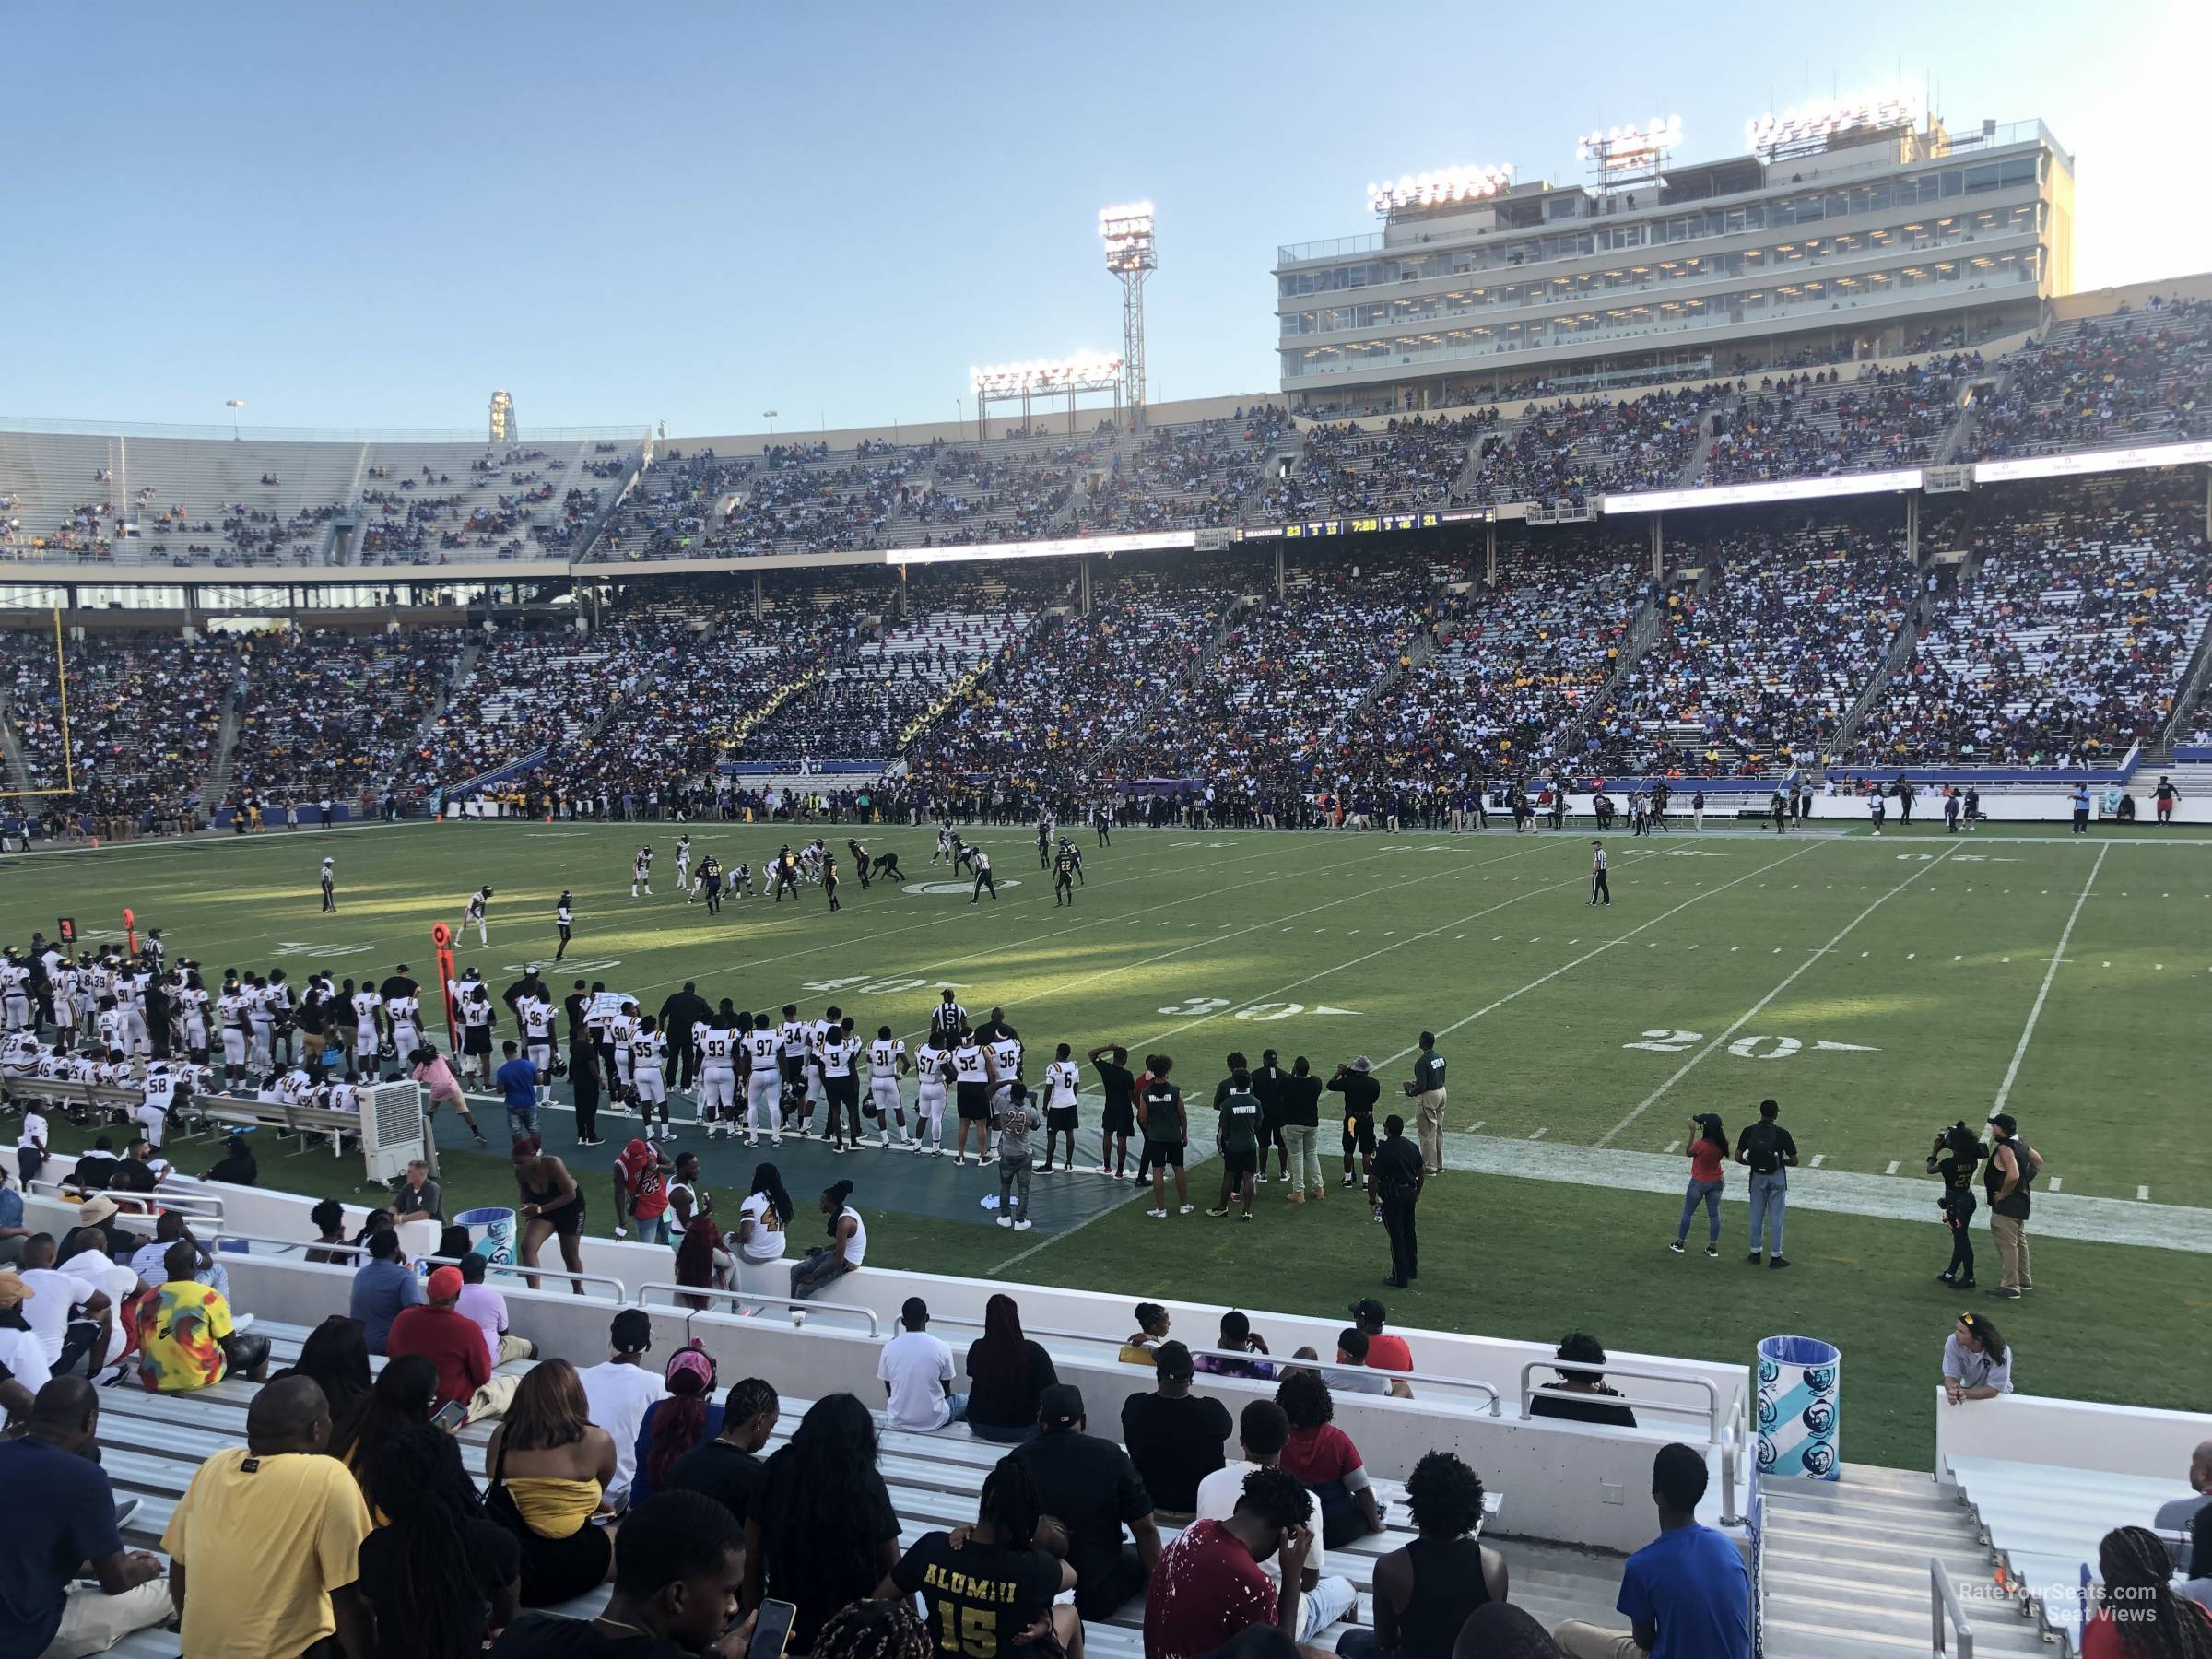 section 22, row 20 seat view  - cotton bowl